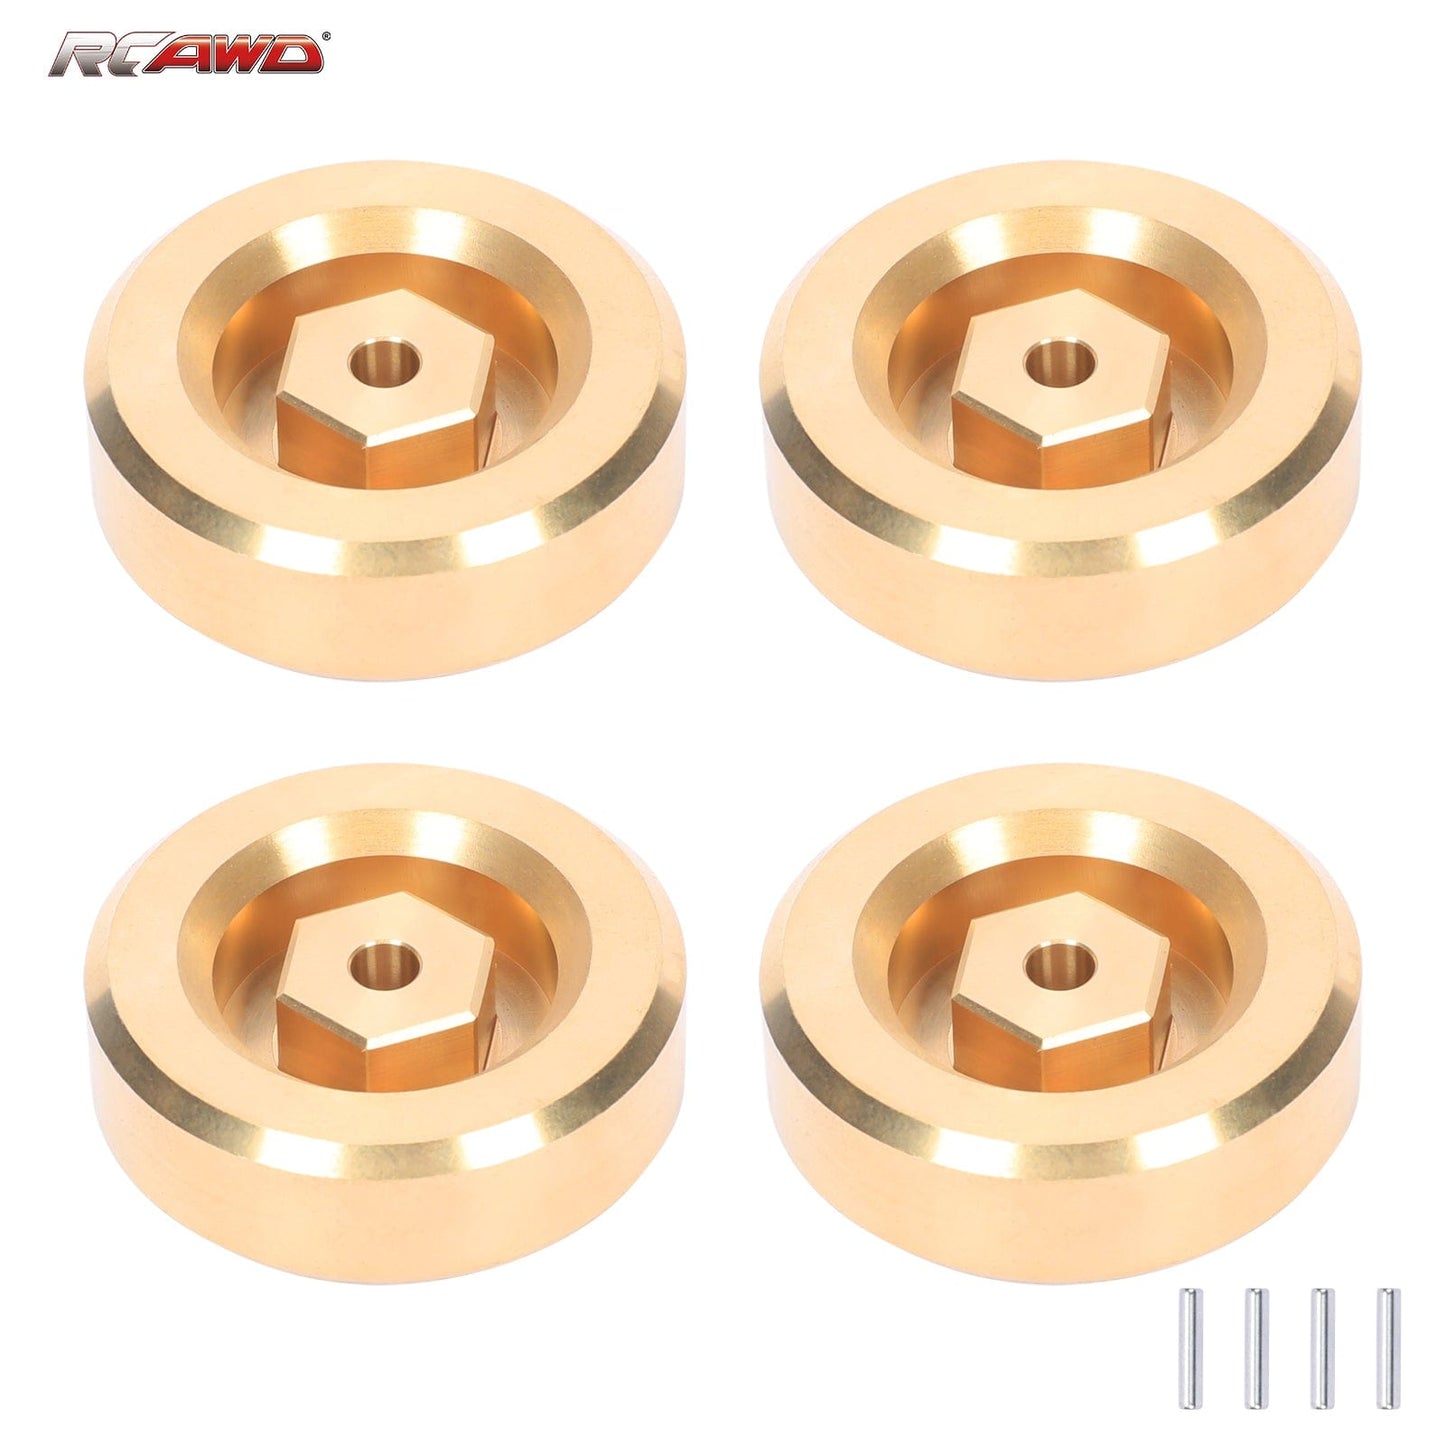 RCAWD Axial UTB18 Capra upgrades brass weighted hex hub set hex weights 268g total D2 - AXI212015Y - RCAWD